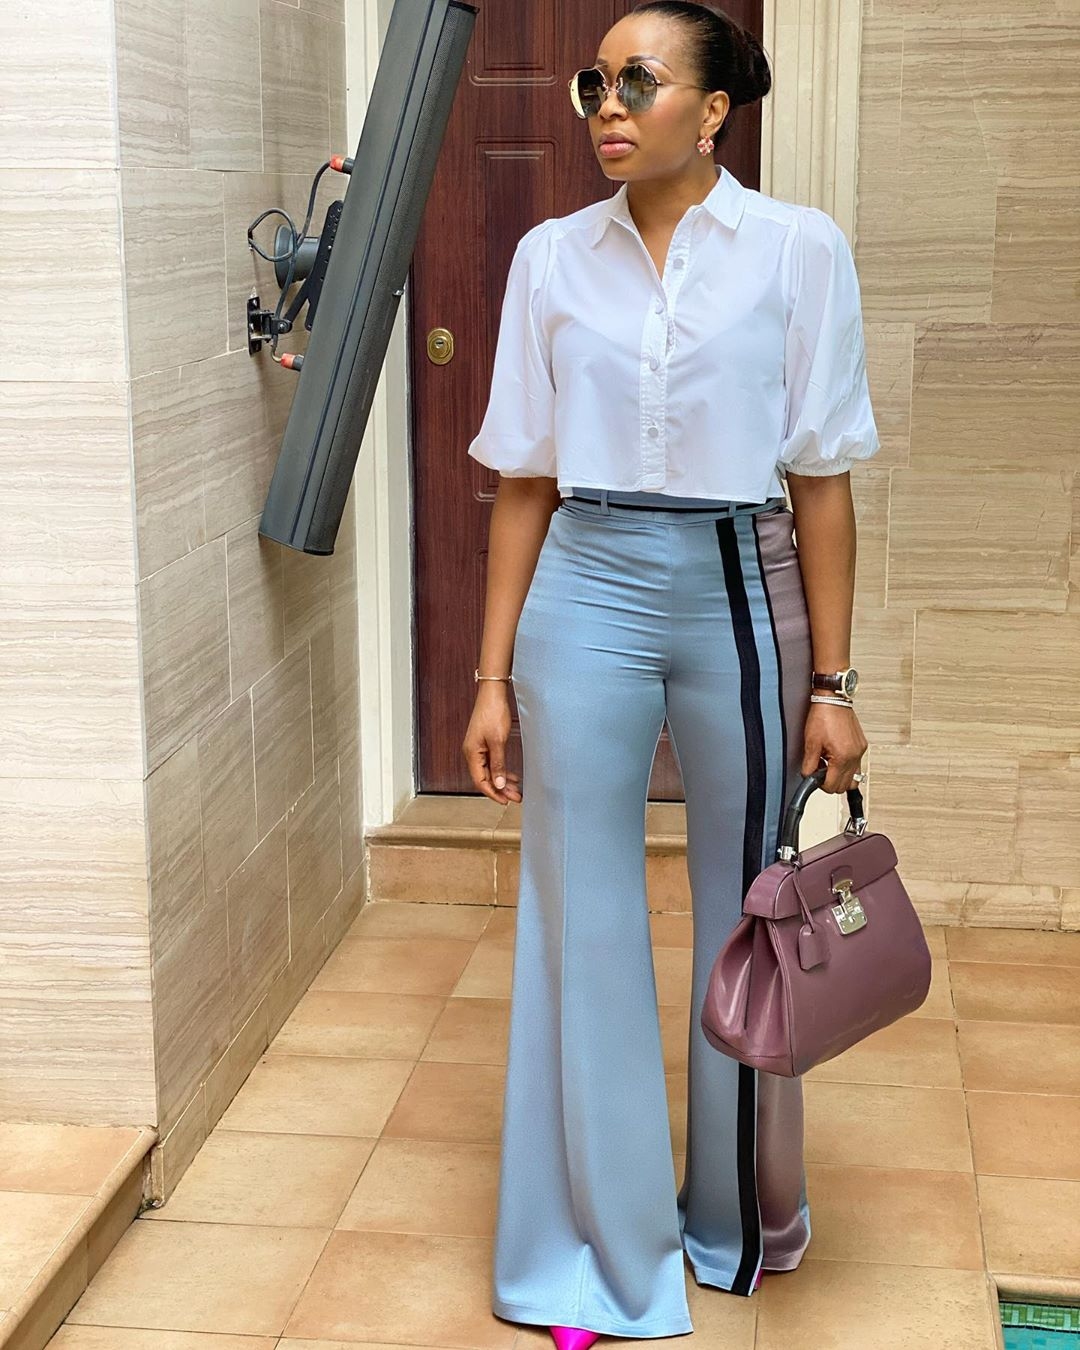 The Chic Looks From Top African Fashion Influencers On Instagram